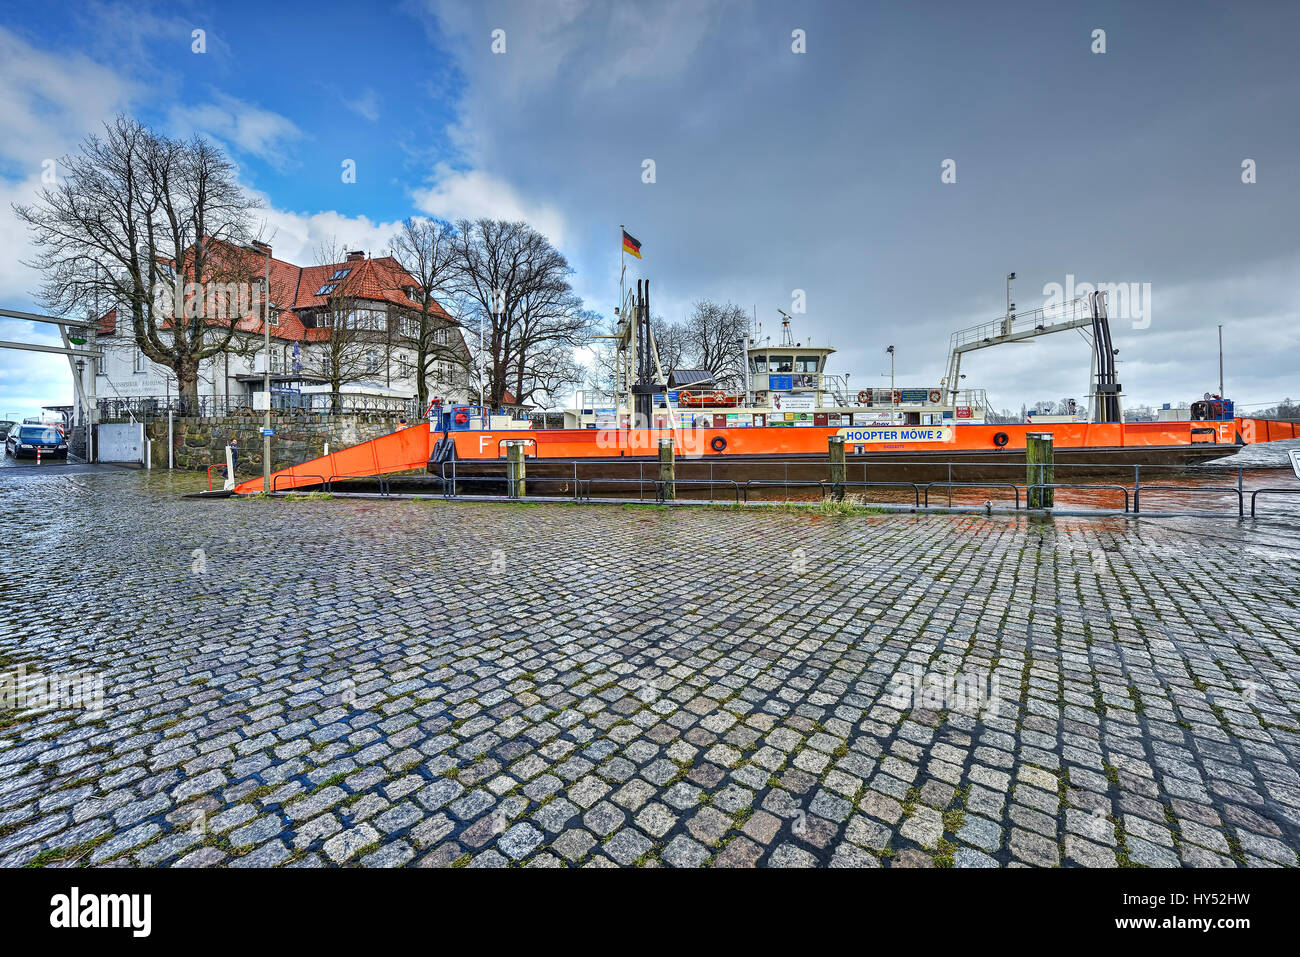 Page 2 - House Flood Europe High Resolution Stock Photography and Images -  Alamy